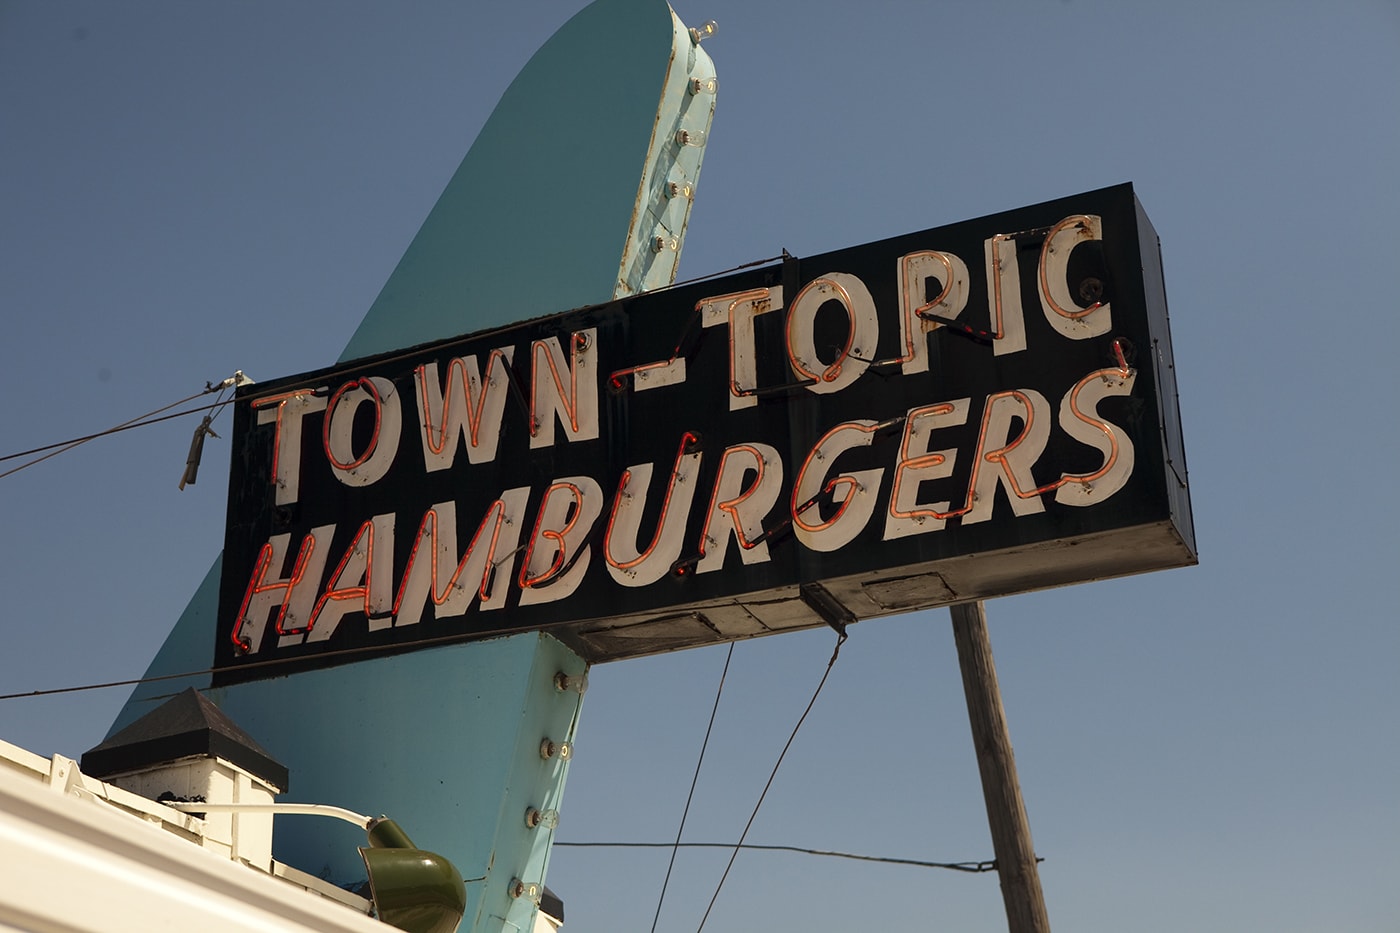 Town Topic Hamburgers in Kansas City, Missouri | Kansas City diner for a road trip stop for lunch or dinner.